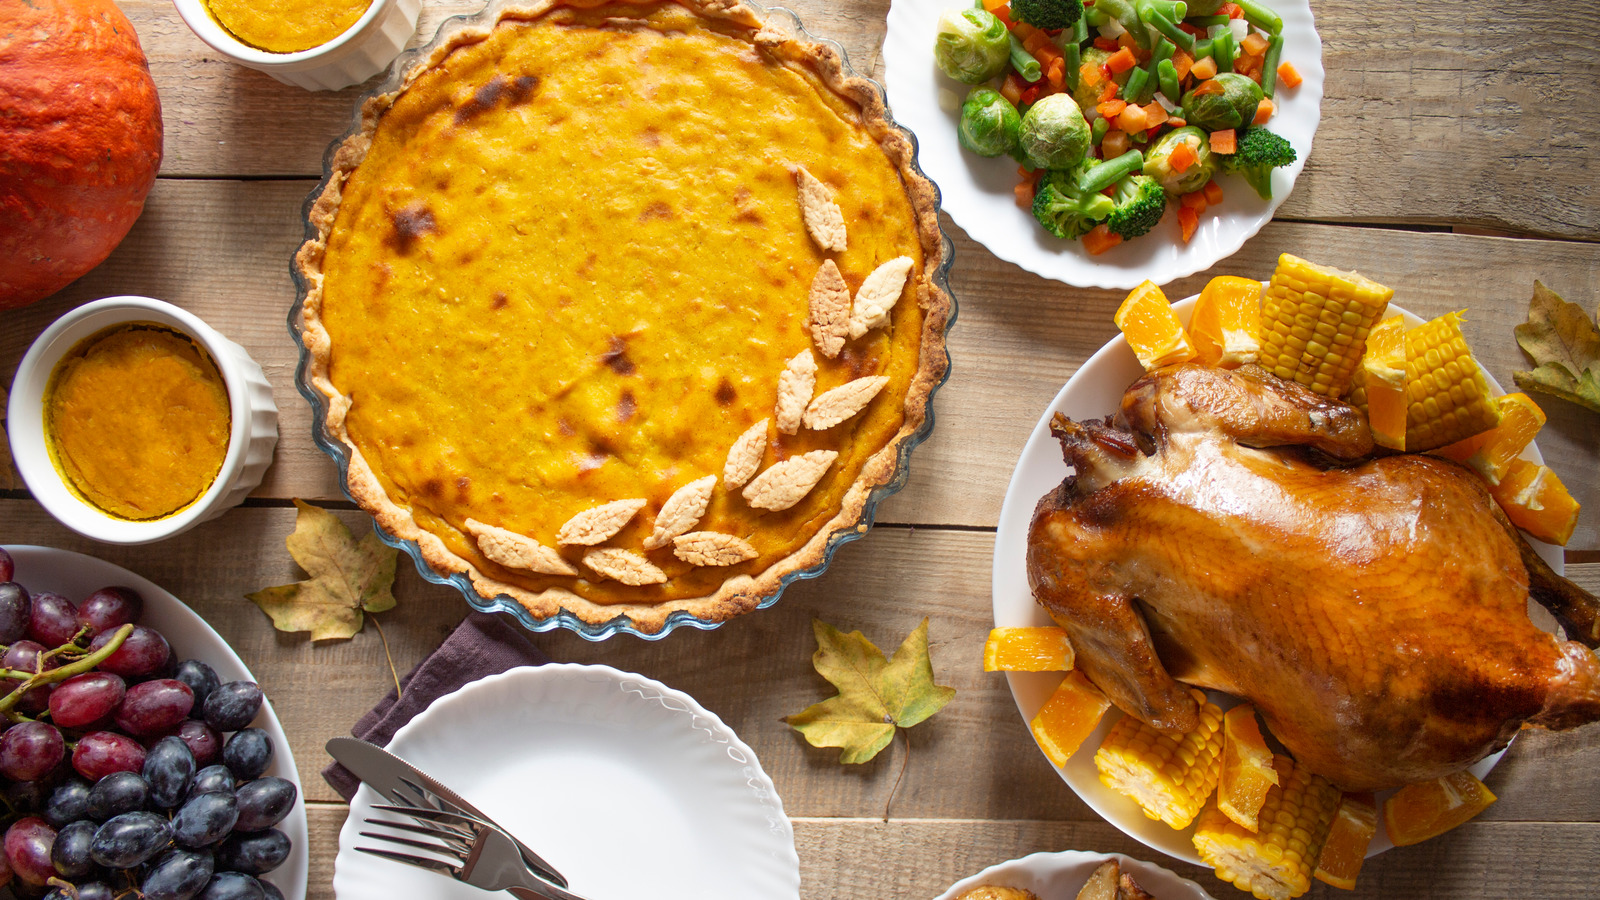 Aldi's 30 Thanksgiving Meal Is An Incredible Value